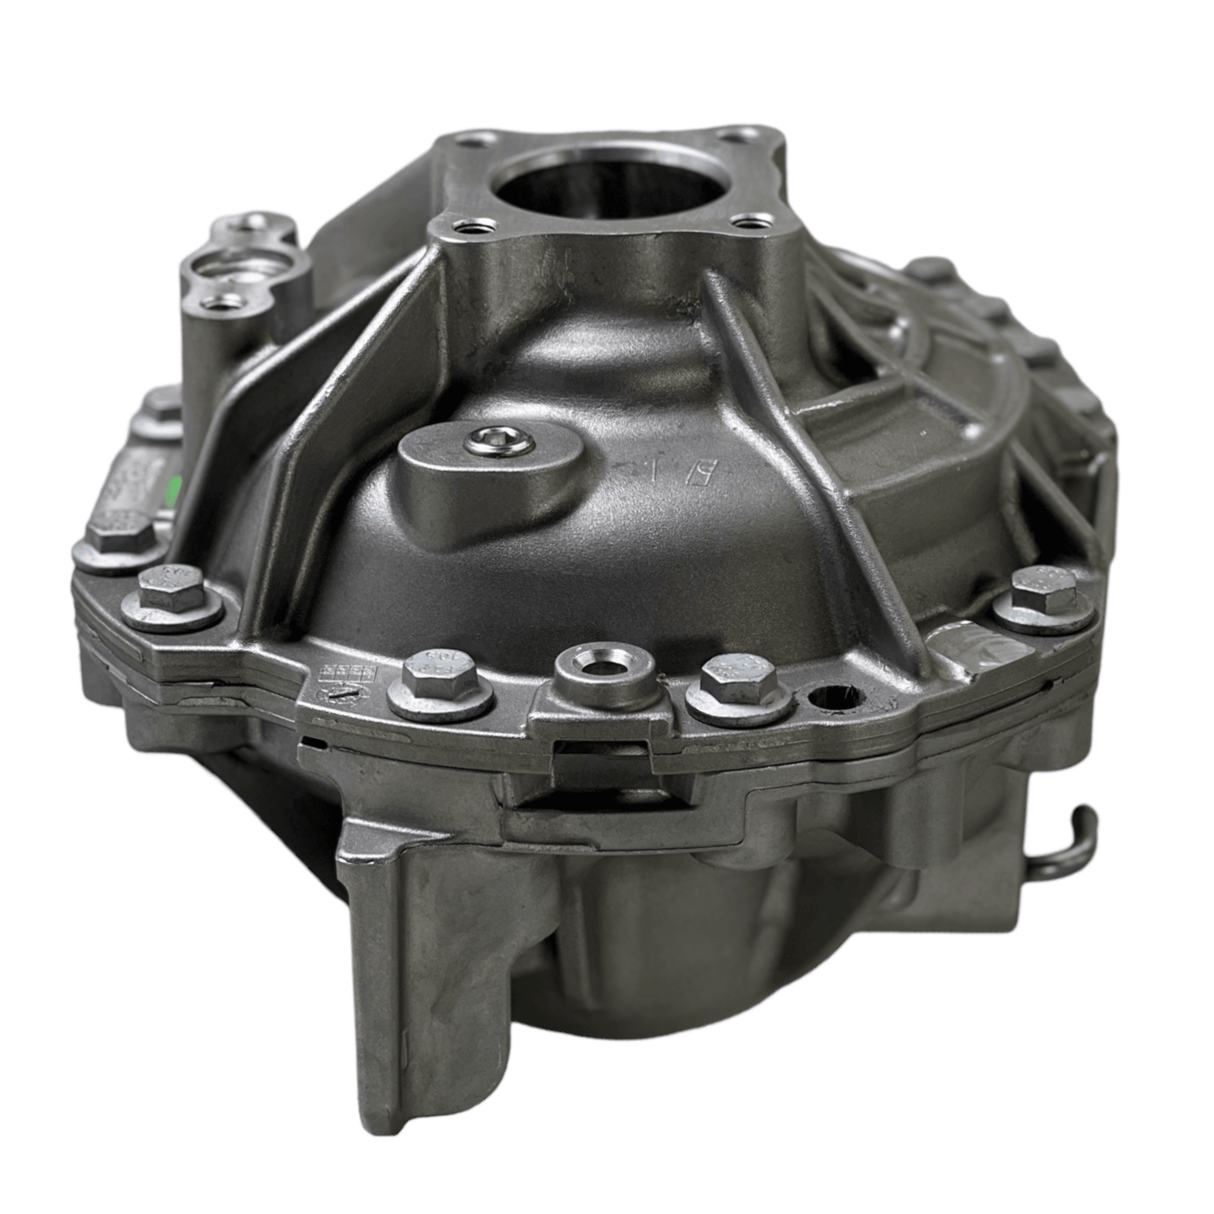 Lr089624 Genuine Land Rover® Front Differential Carrier Assembly.